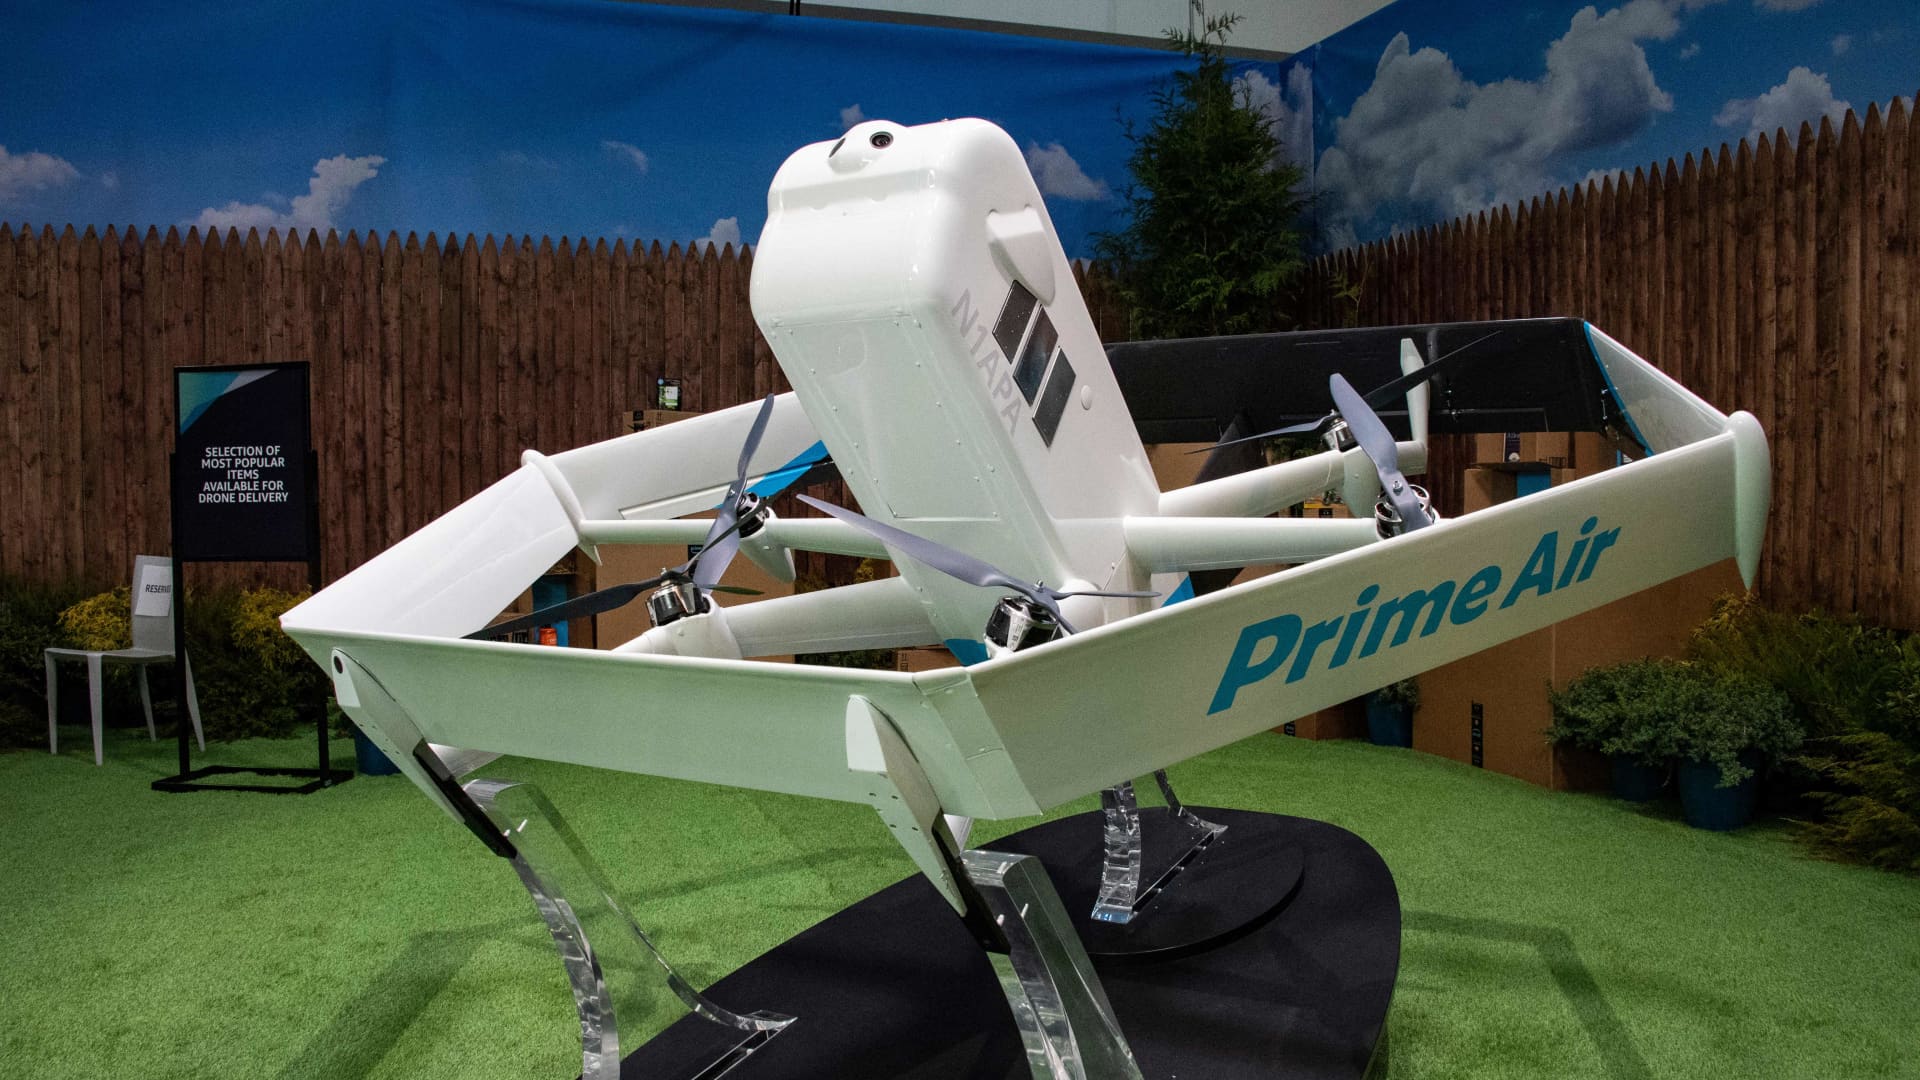 Amazon drone delivery executive who oversaw safety, FAA relations departs the company